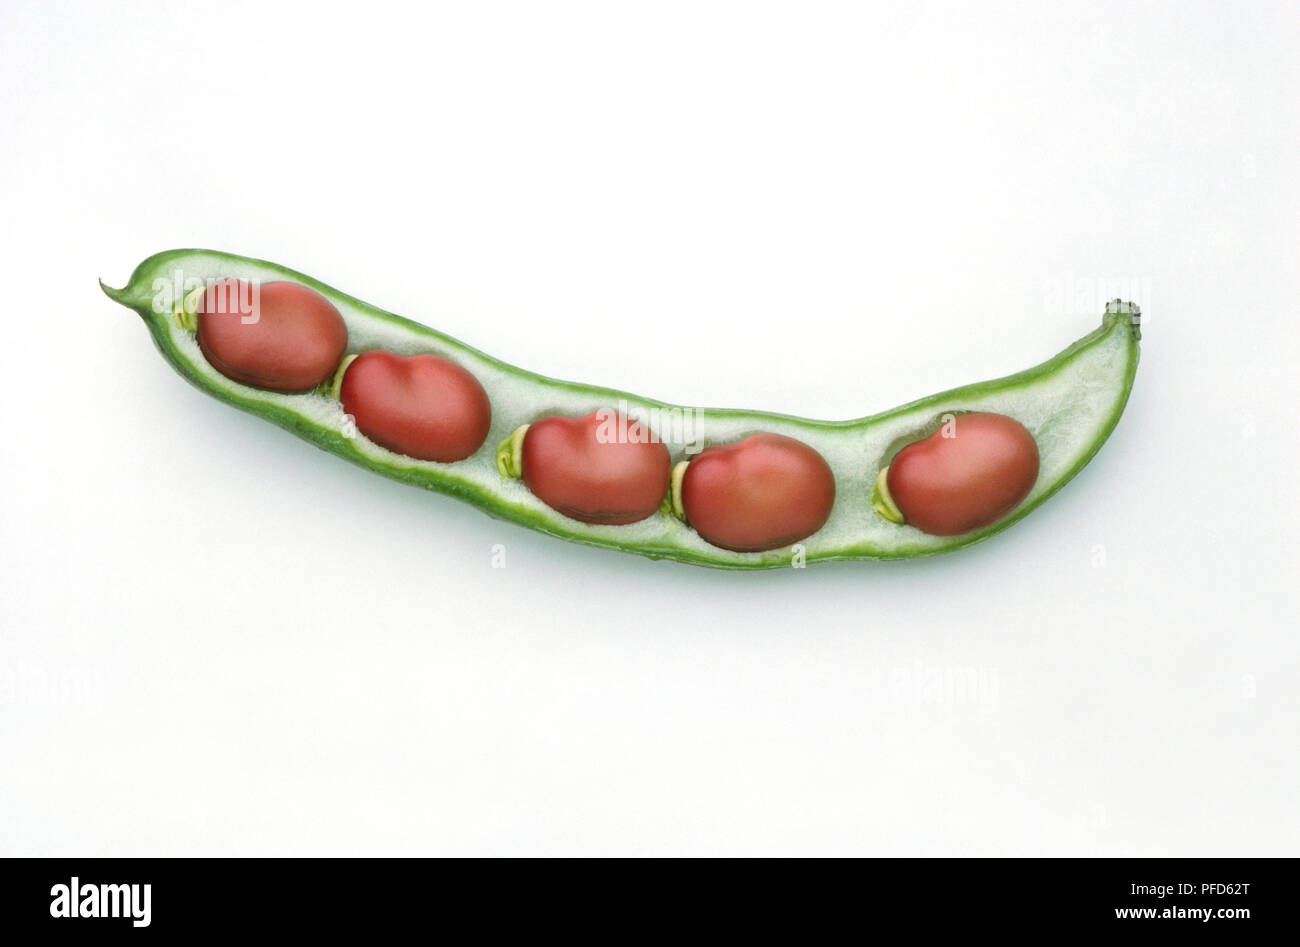 Broad beans 'Red Epicure' in pod, close-up Stock Photo